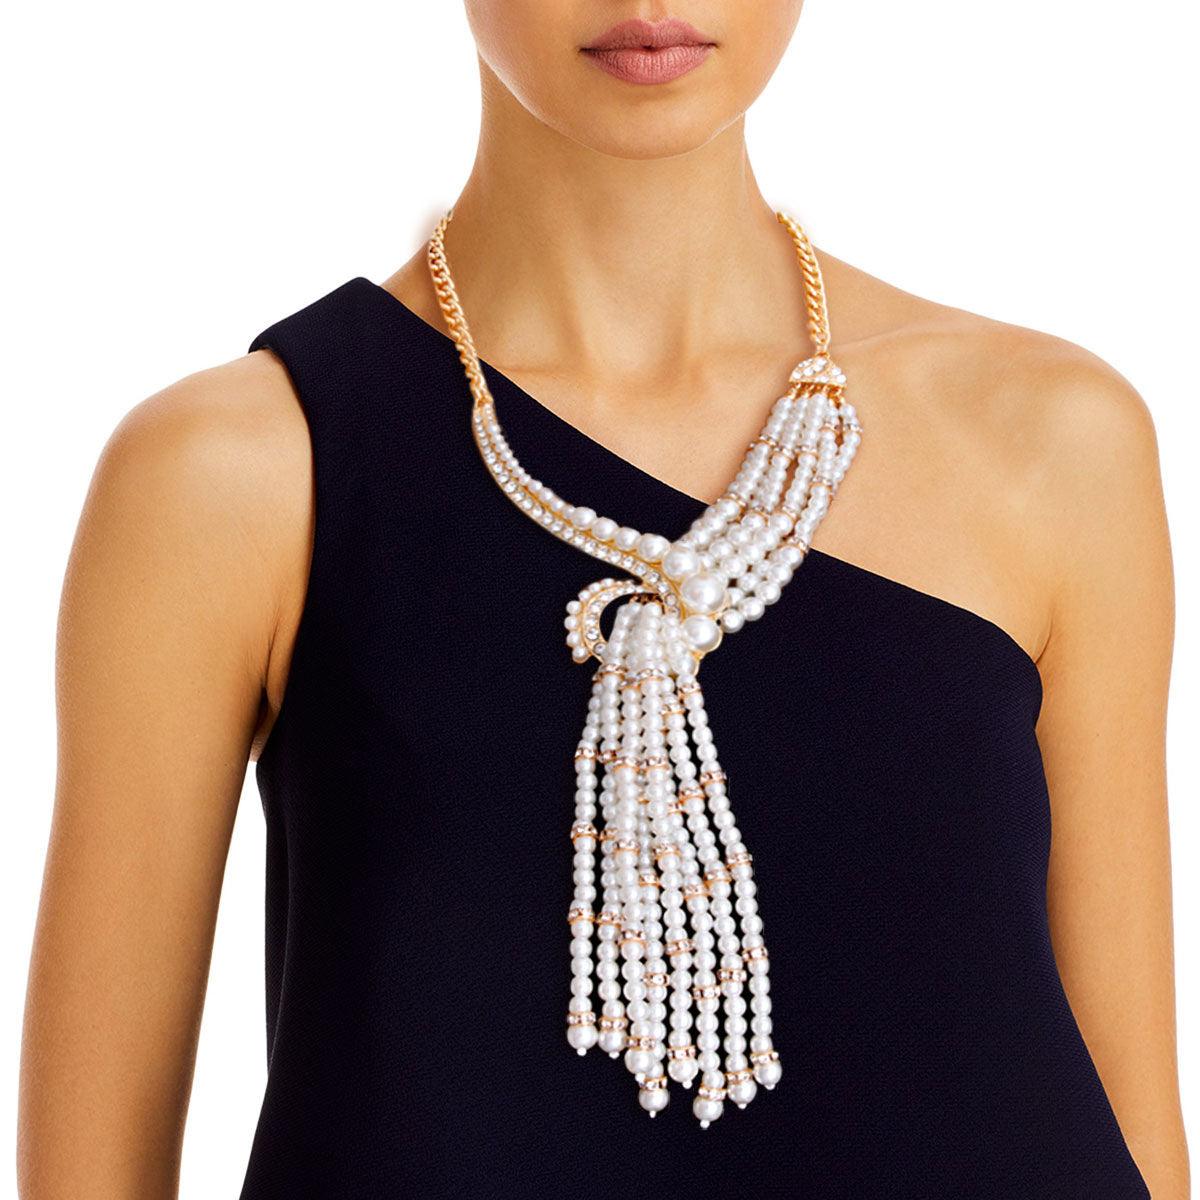 Stunning Asymmetric Pearl Knot & Rhinestone Fashion Necklace – Must-Have Set!